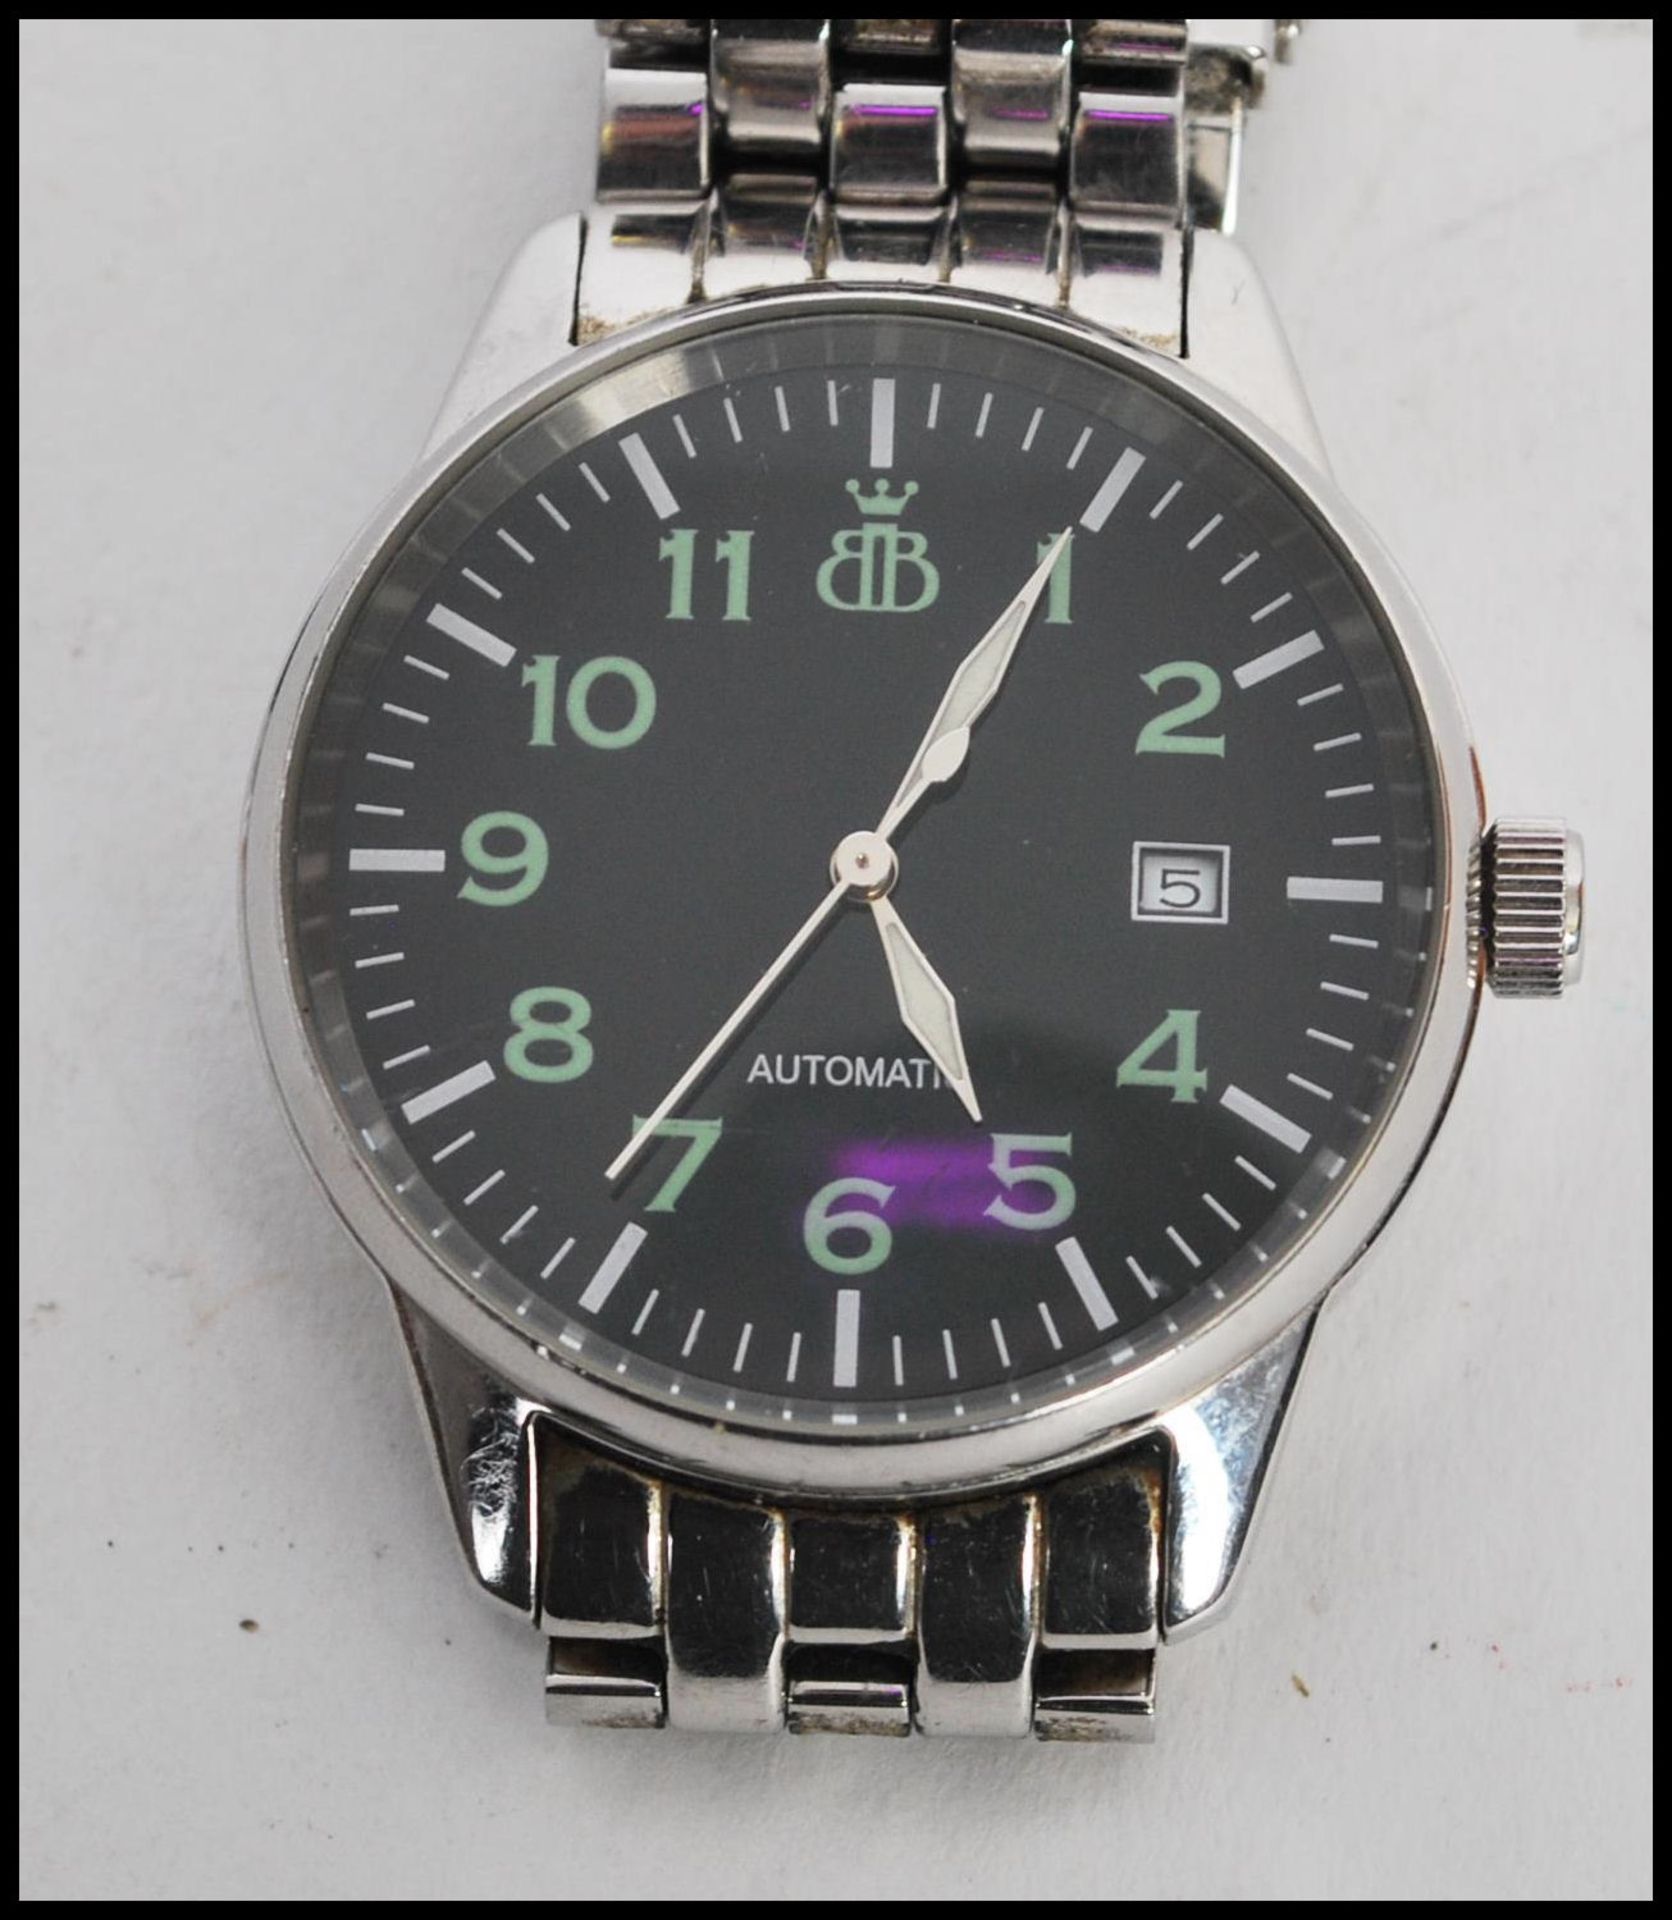 A Brooks and Bentley military style gentleman's wrist watch, black face with illuminous numerals,